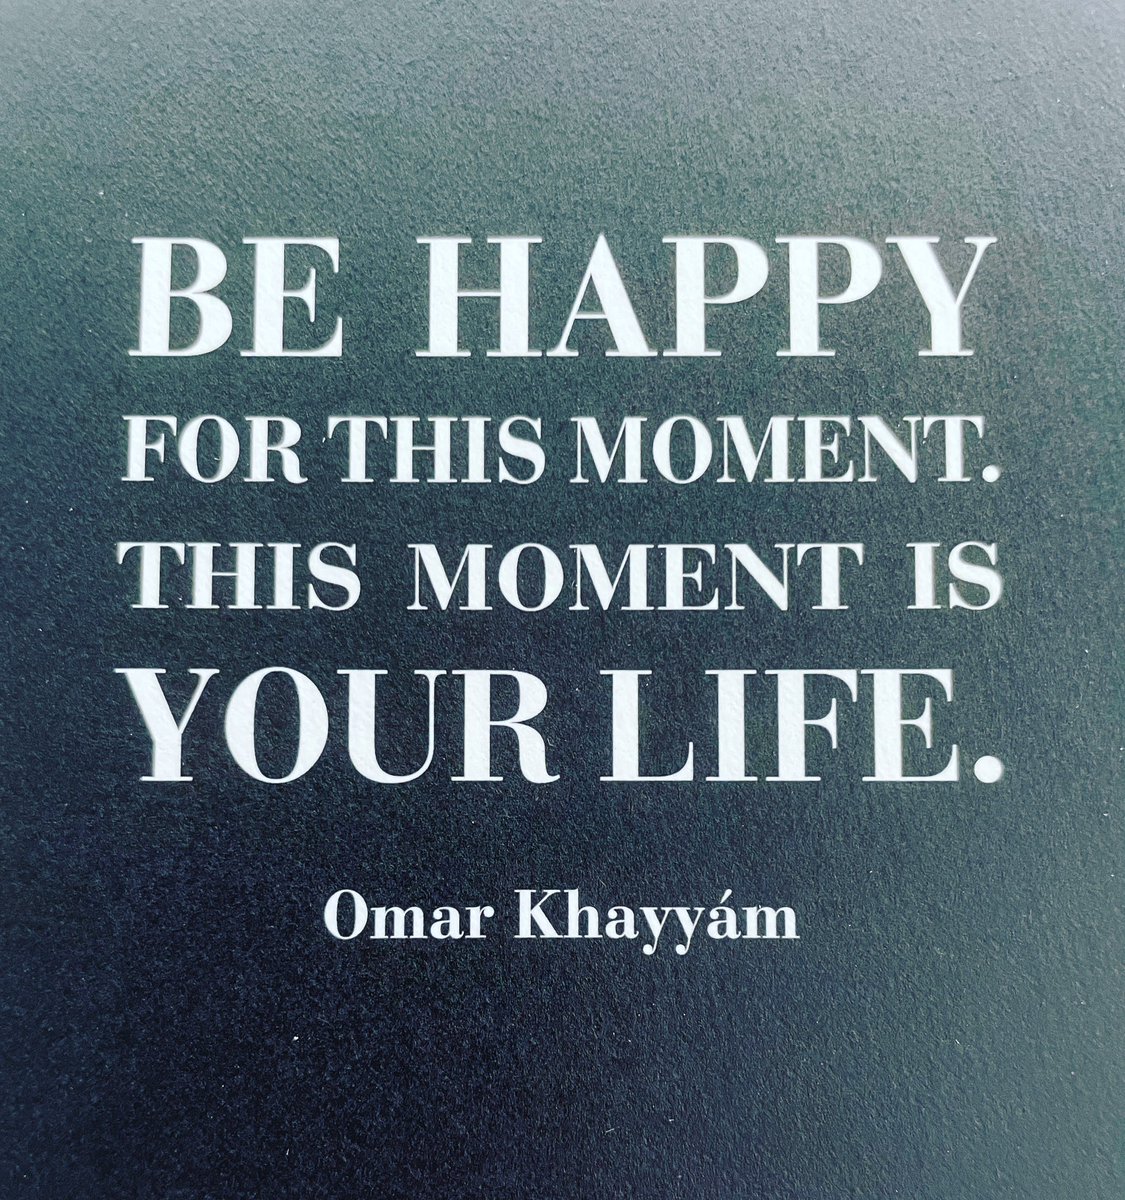 Choose to live every moment of your life.
#happiness #happyyou #choosehappiness #iamhappy #behappy #beinthenow #bepresentinthemoment #livenow